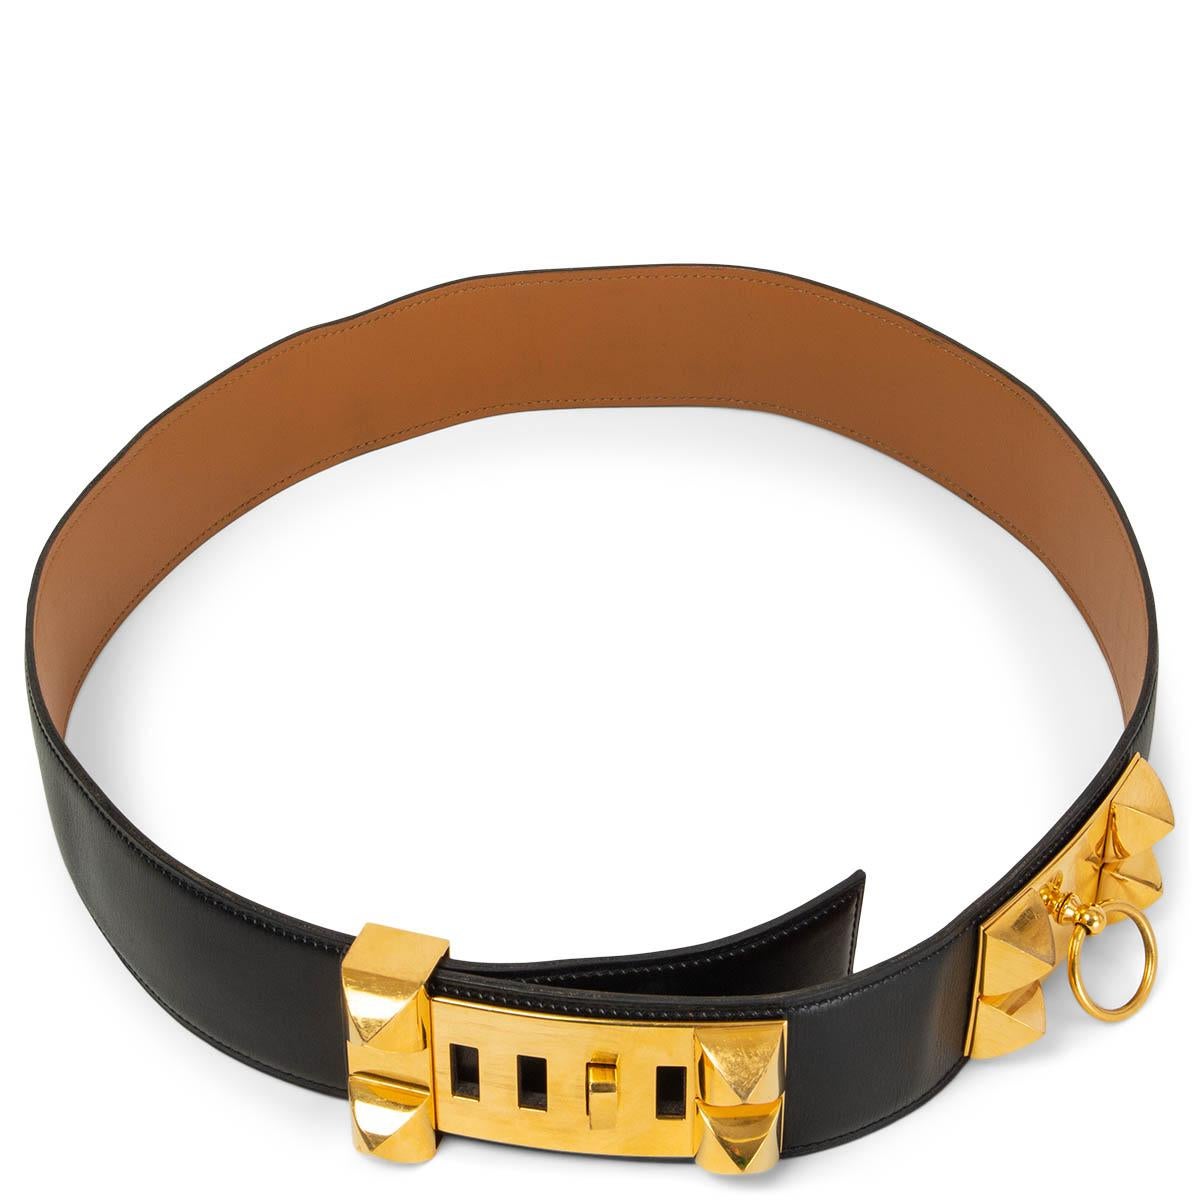 100% authentic Hermès vintage Collier De Chien belt in black Box leather featuring gold-tone hardware. Has been carried and shows some wear and scratches on the hardware. Overall in very good vintage condition.

Measurements
Tag Size	90
Size	90cm